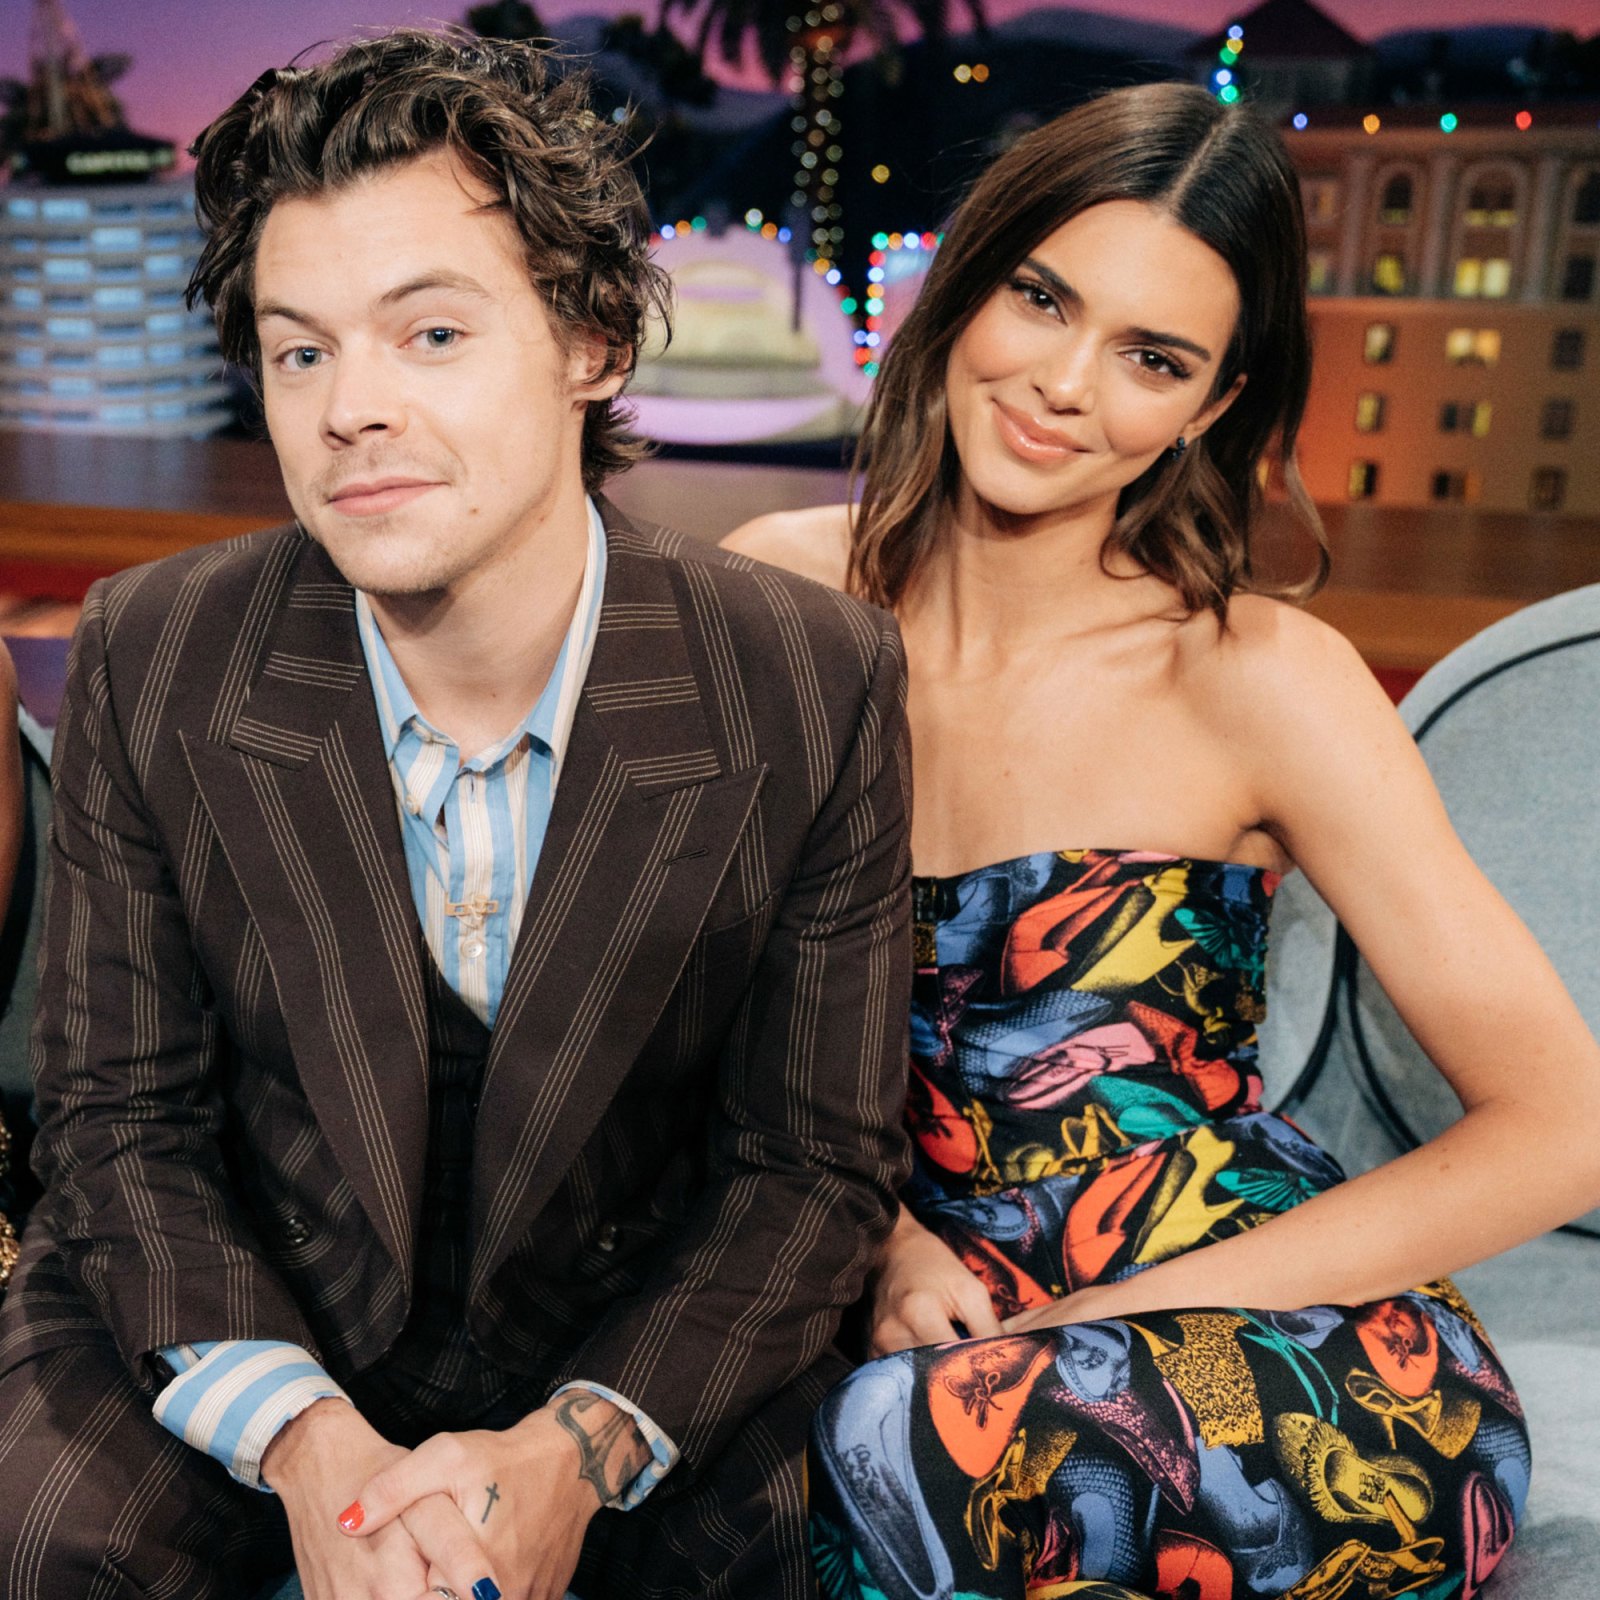 Kendall Jenner and Harry Styles The Kardashian-Jenner Friendships With Their Exes A Guide